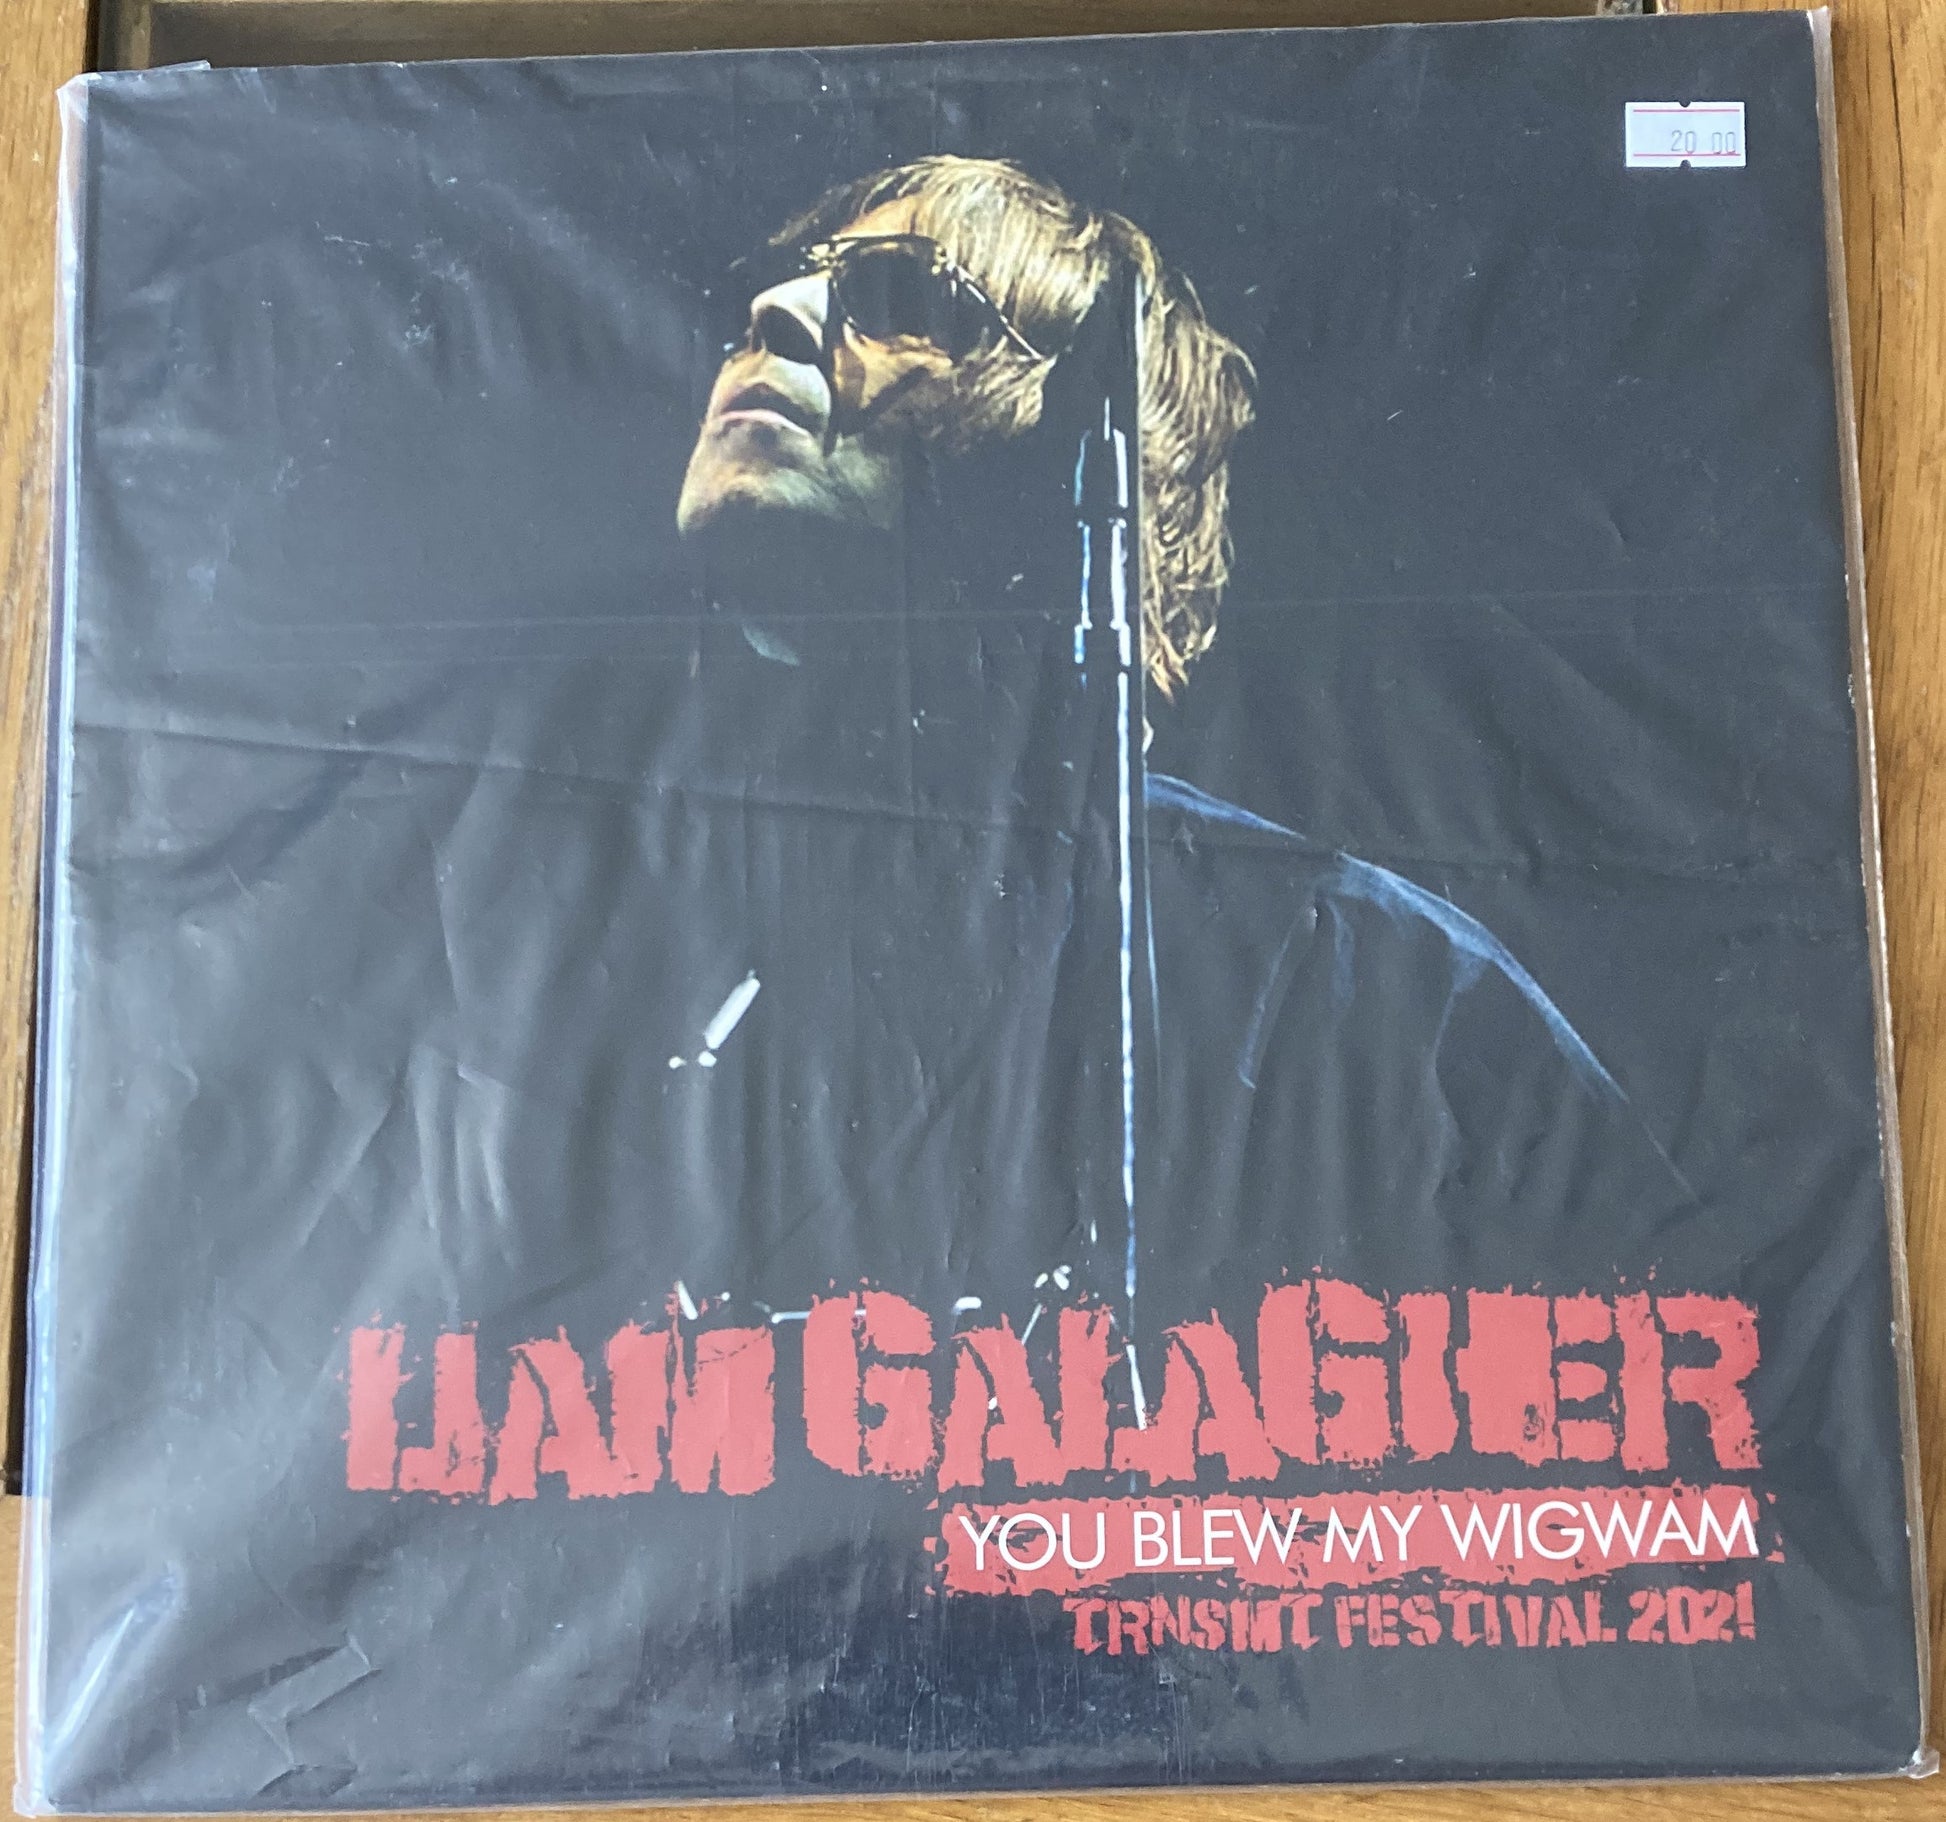 The front of 'Liam Gallagher - You Blew My Wigwam' on vinyl